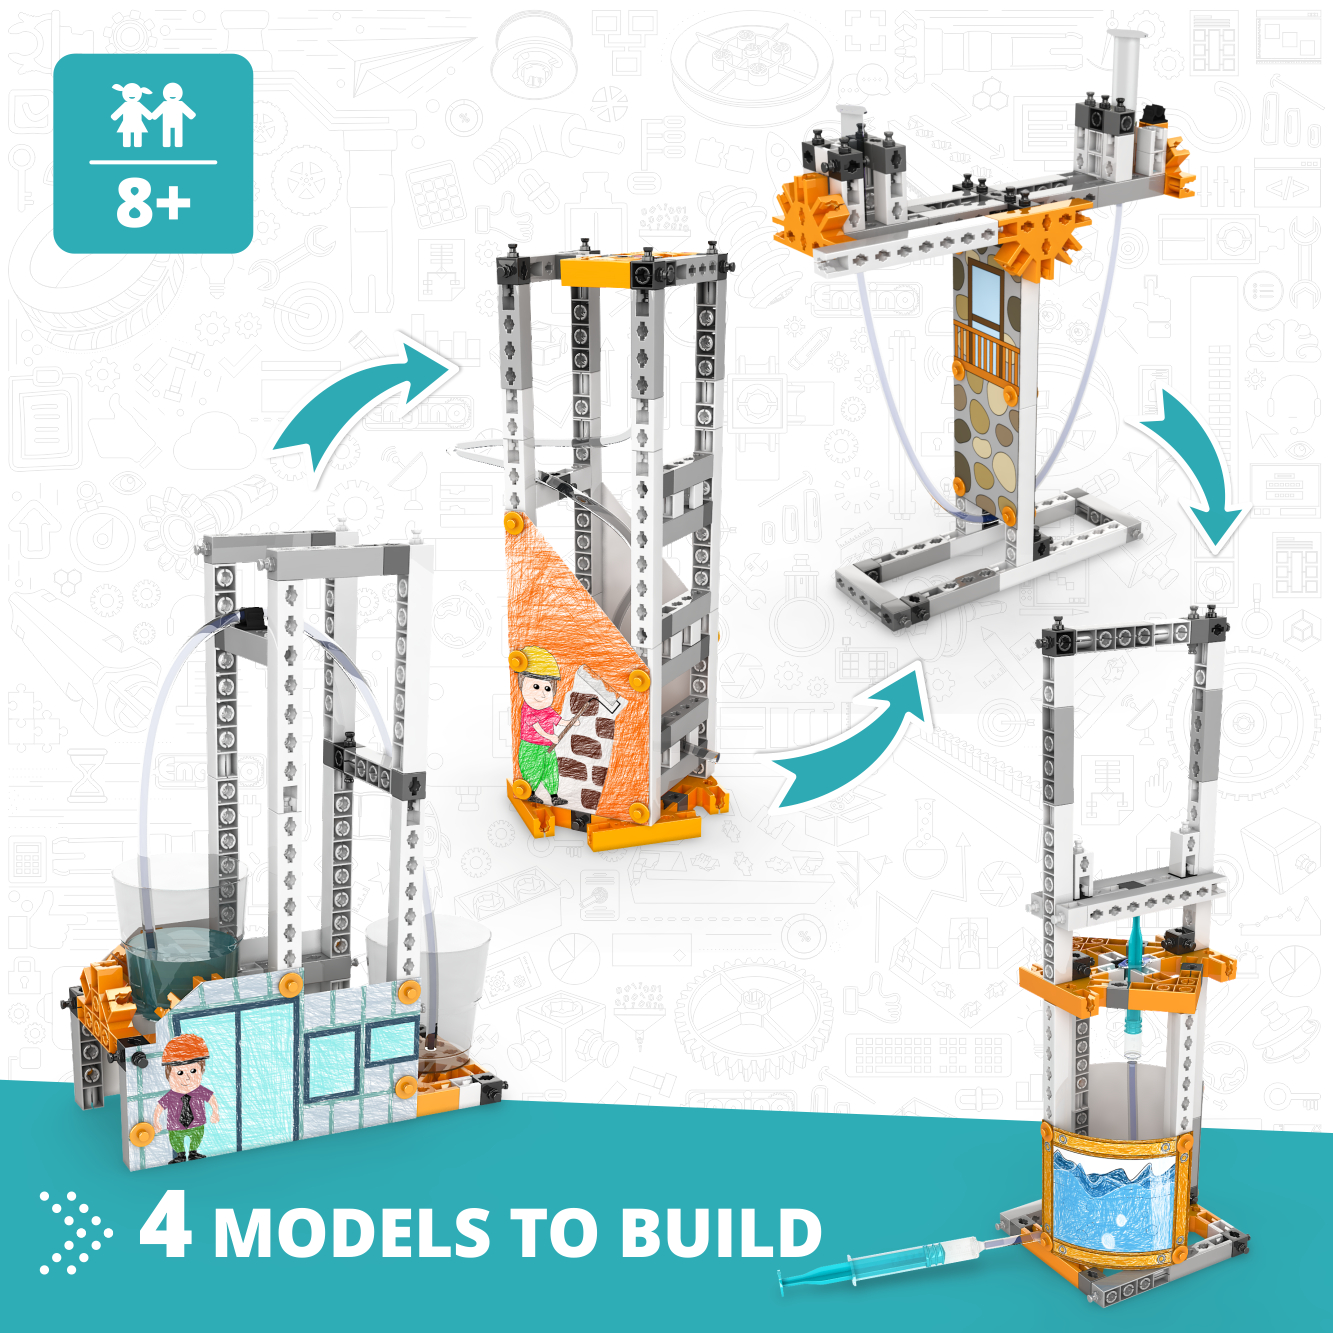 "How Hydraulics Work?" Toybook Series - STEM. product Image, showing model